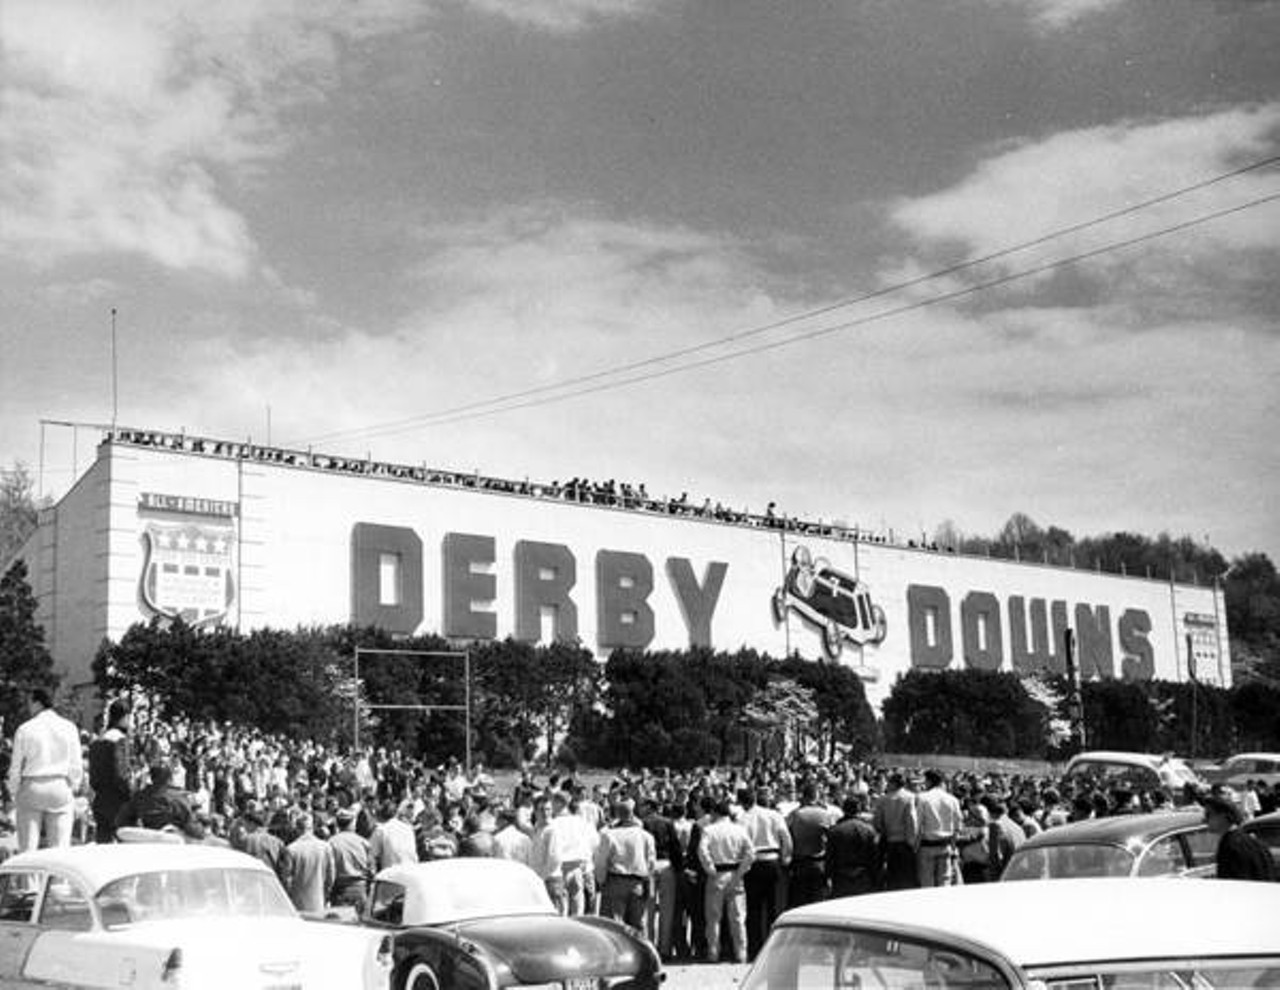 Outside of Derby Downs, 1957